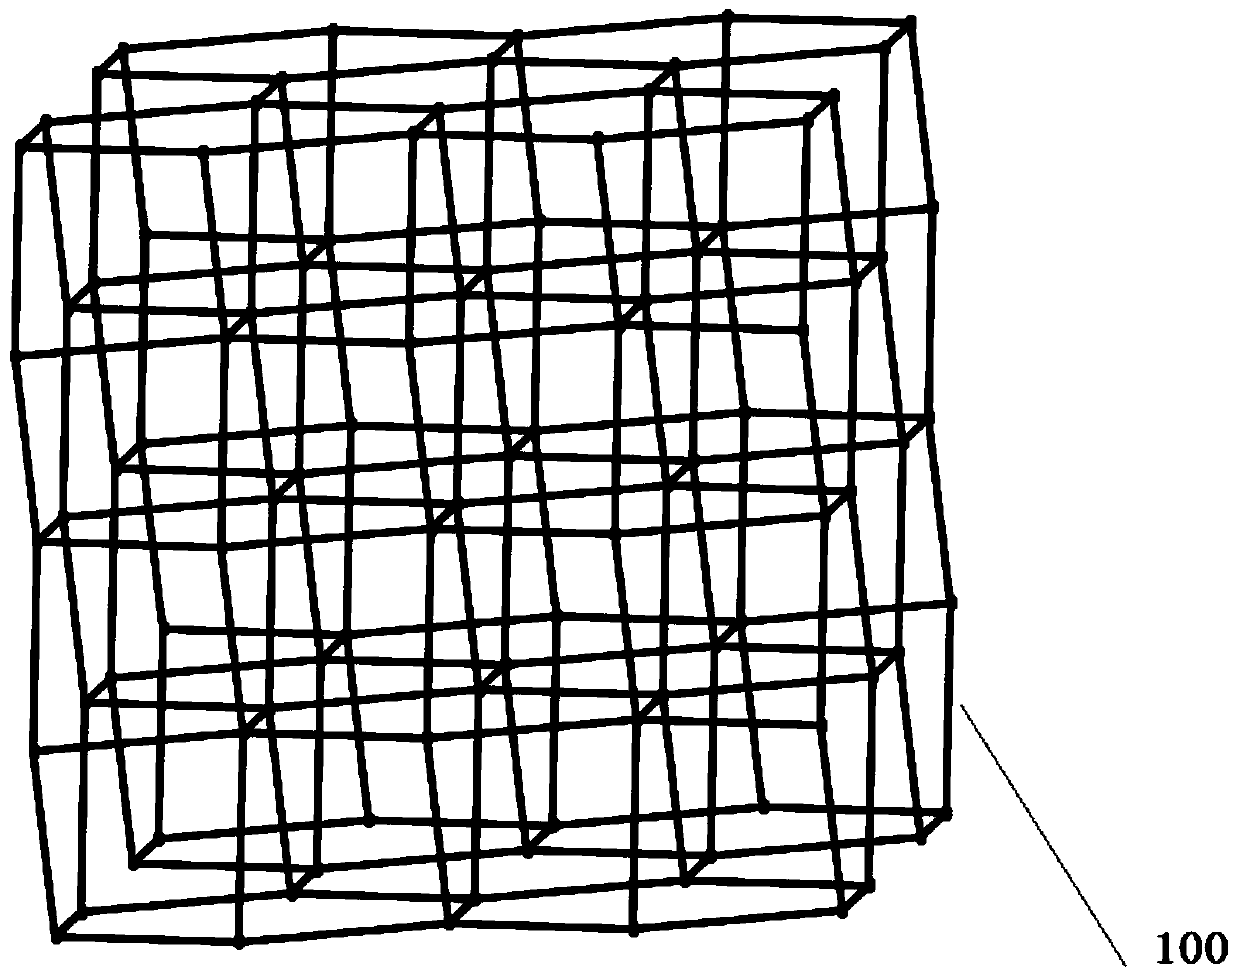 A two-way regular hexagonal grid structure and its construction method